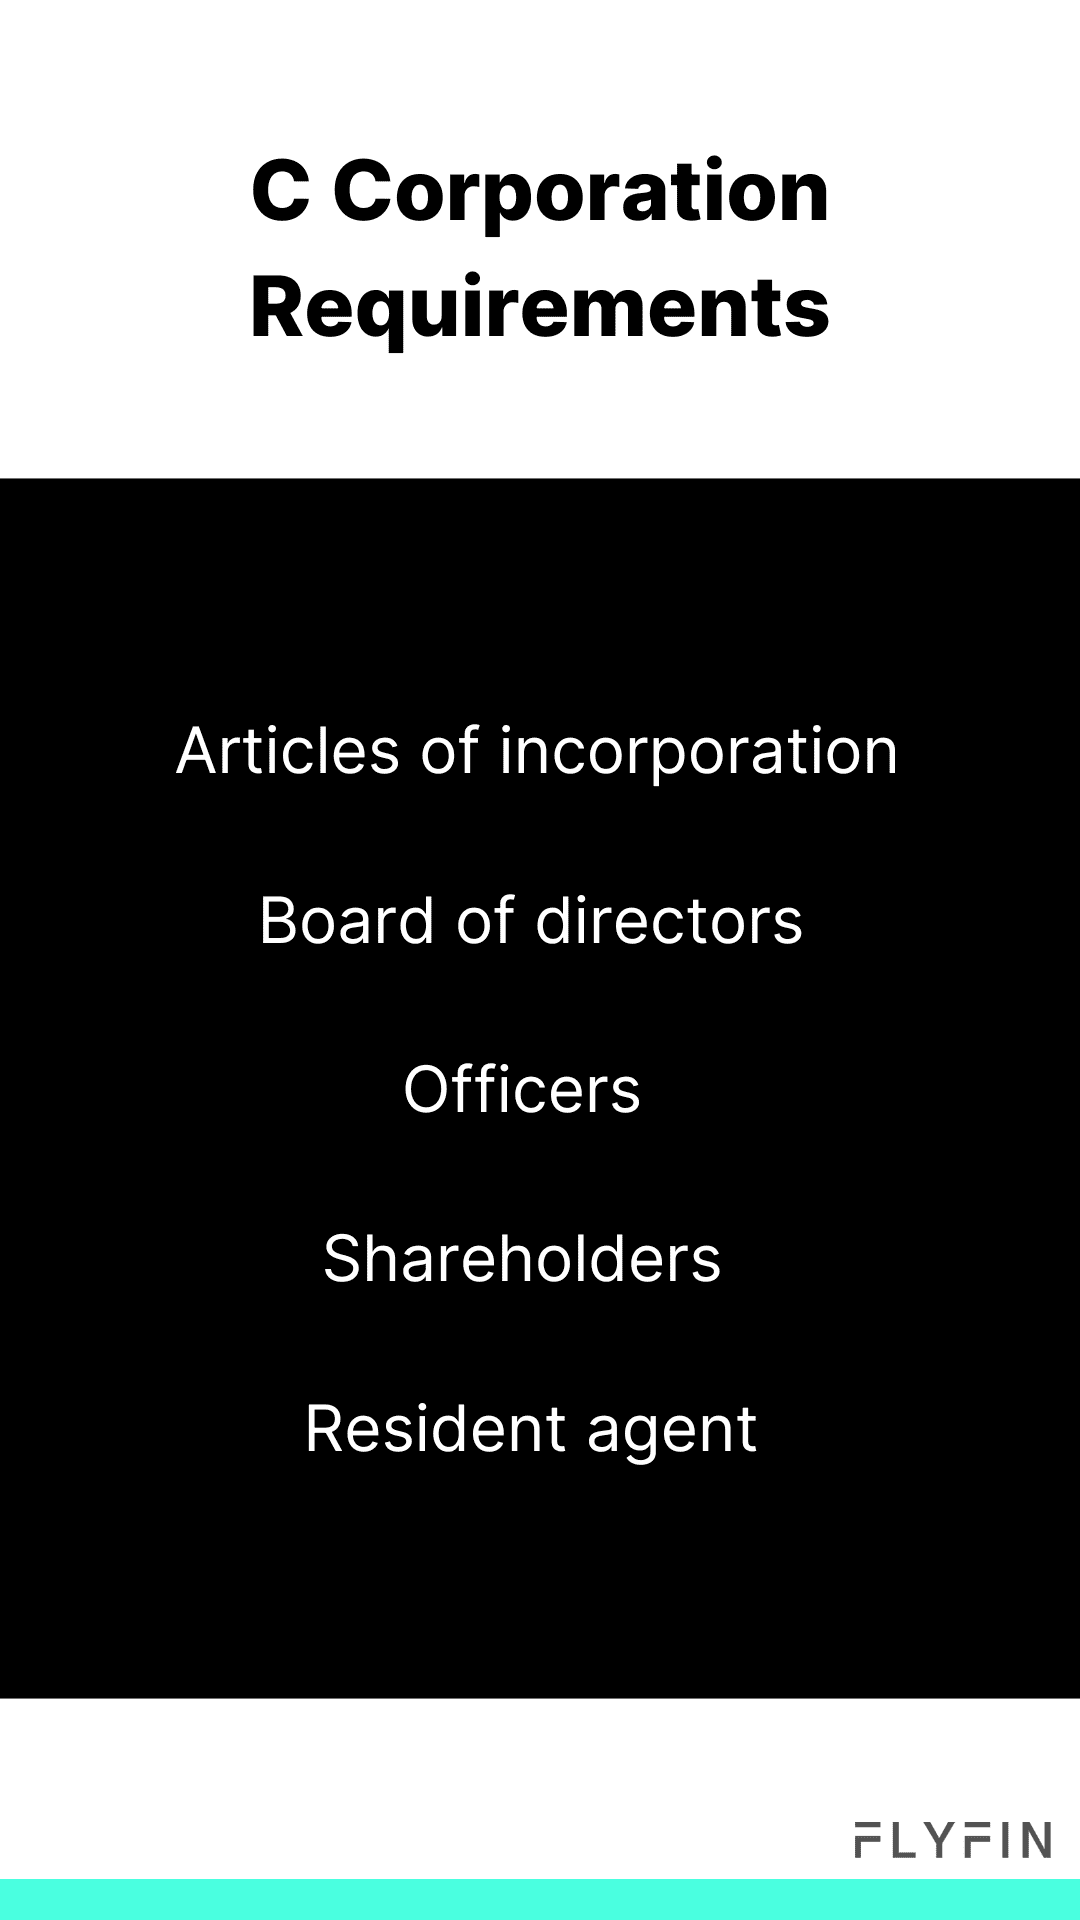 Alt text: Image describing the requirements for a C Corporation including articles of incorporation, board of directors, officers, shareholders, and resident agent. No mention of self-employment, 1099, freelancer, or taxes.